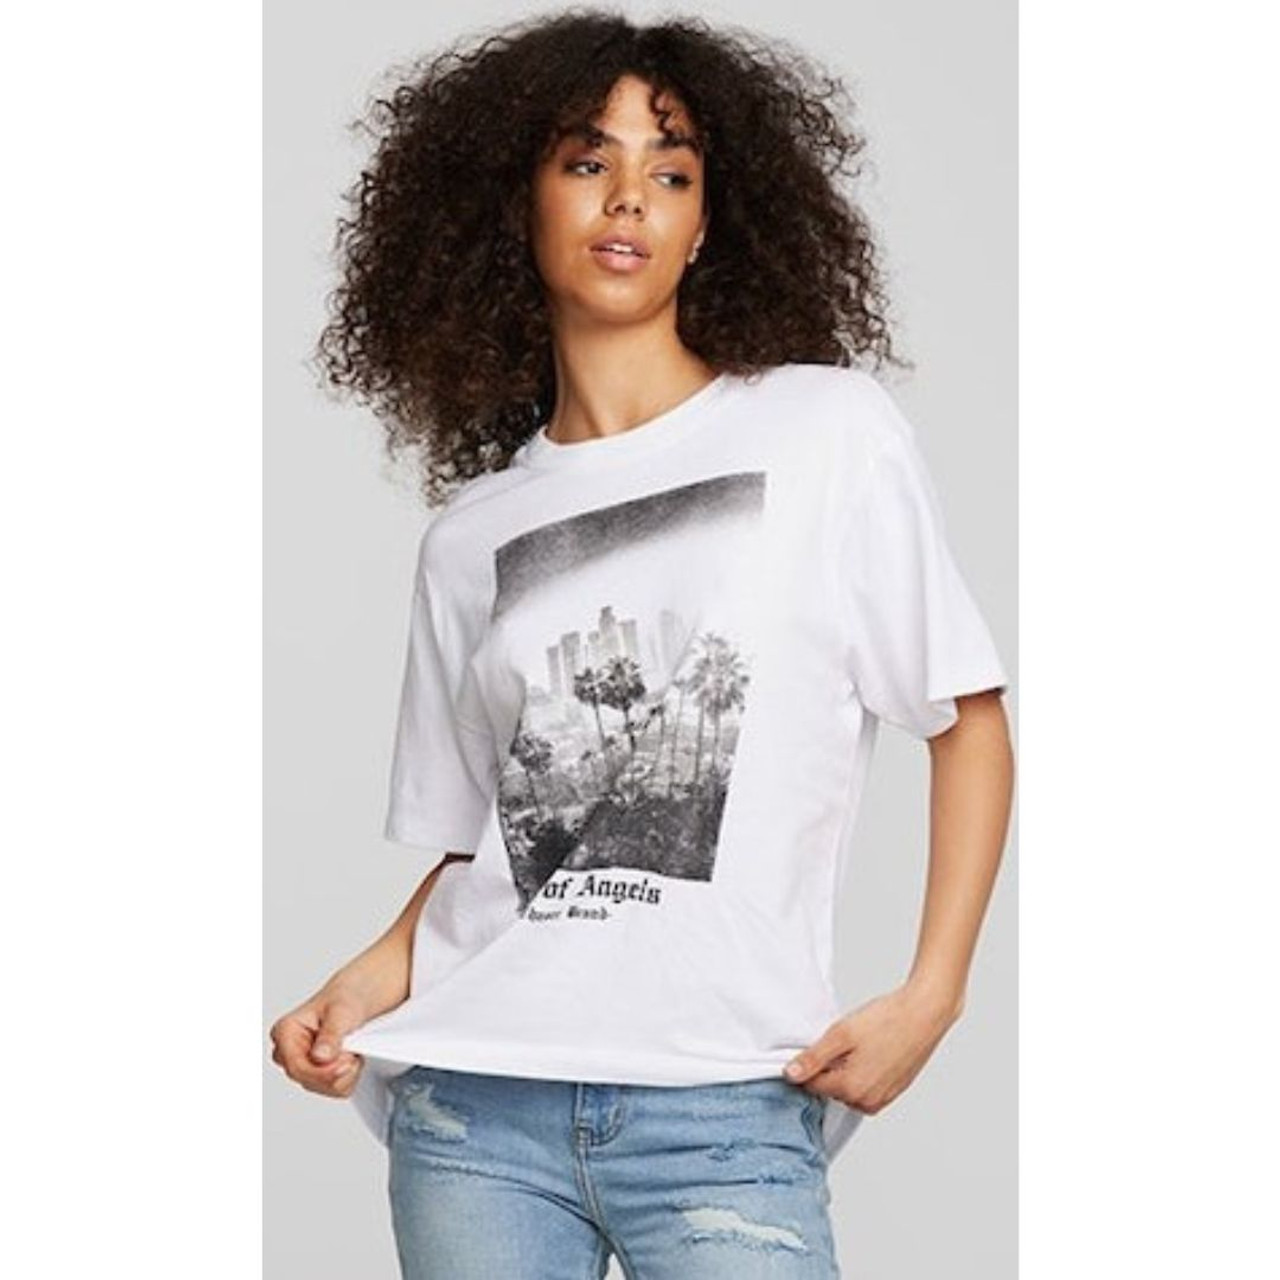 https://cdn11.bigcommerce.com/s-fbddb/images/stencil/1280x1280/products/1711/4287/chaser-brand-city-of-angels-los-angeles-california-photograph-womens-white-fashion-t-shirt-side-2__52314.1670005054.jpg?c=2&imbypass=on